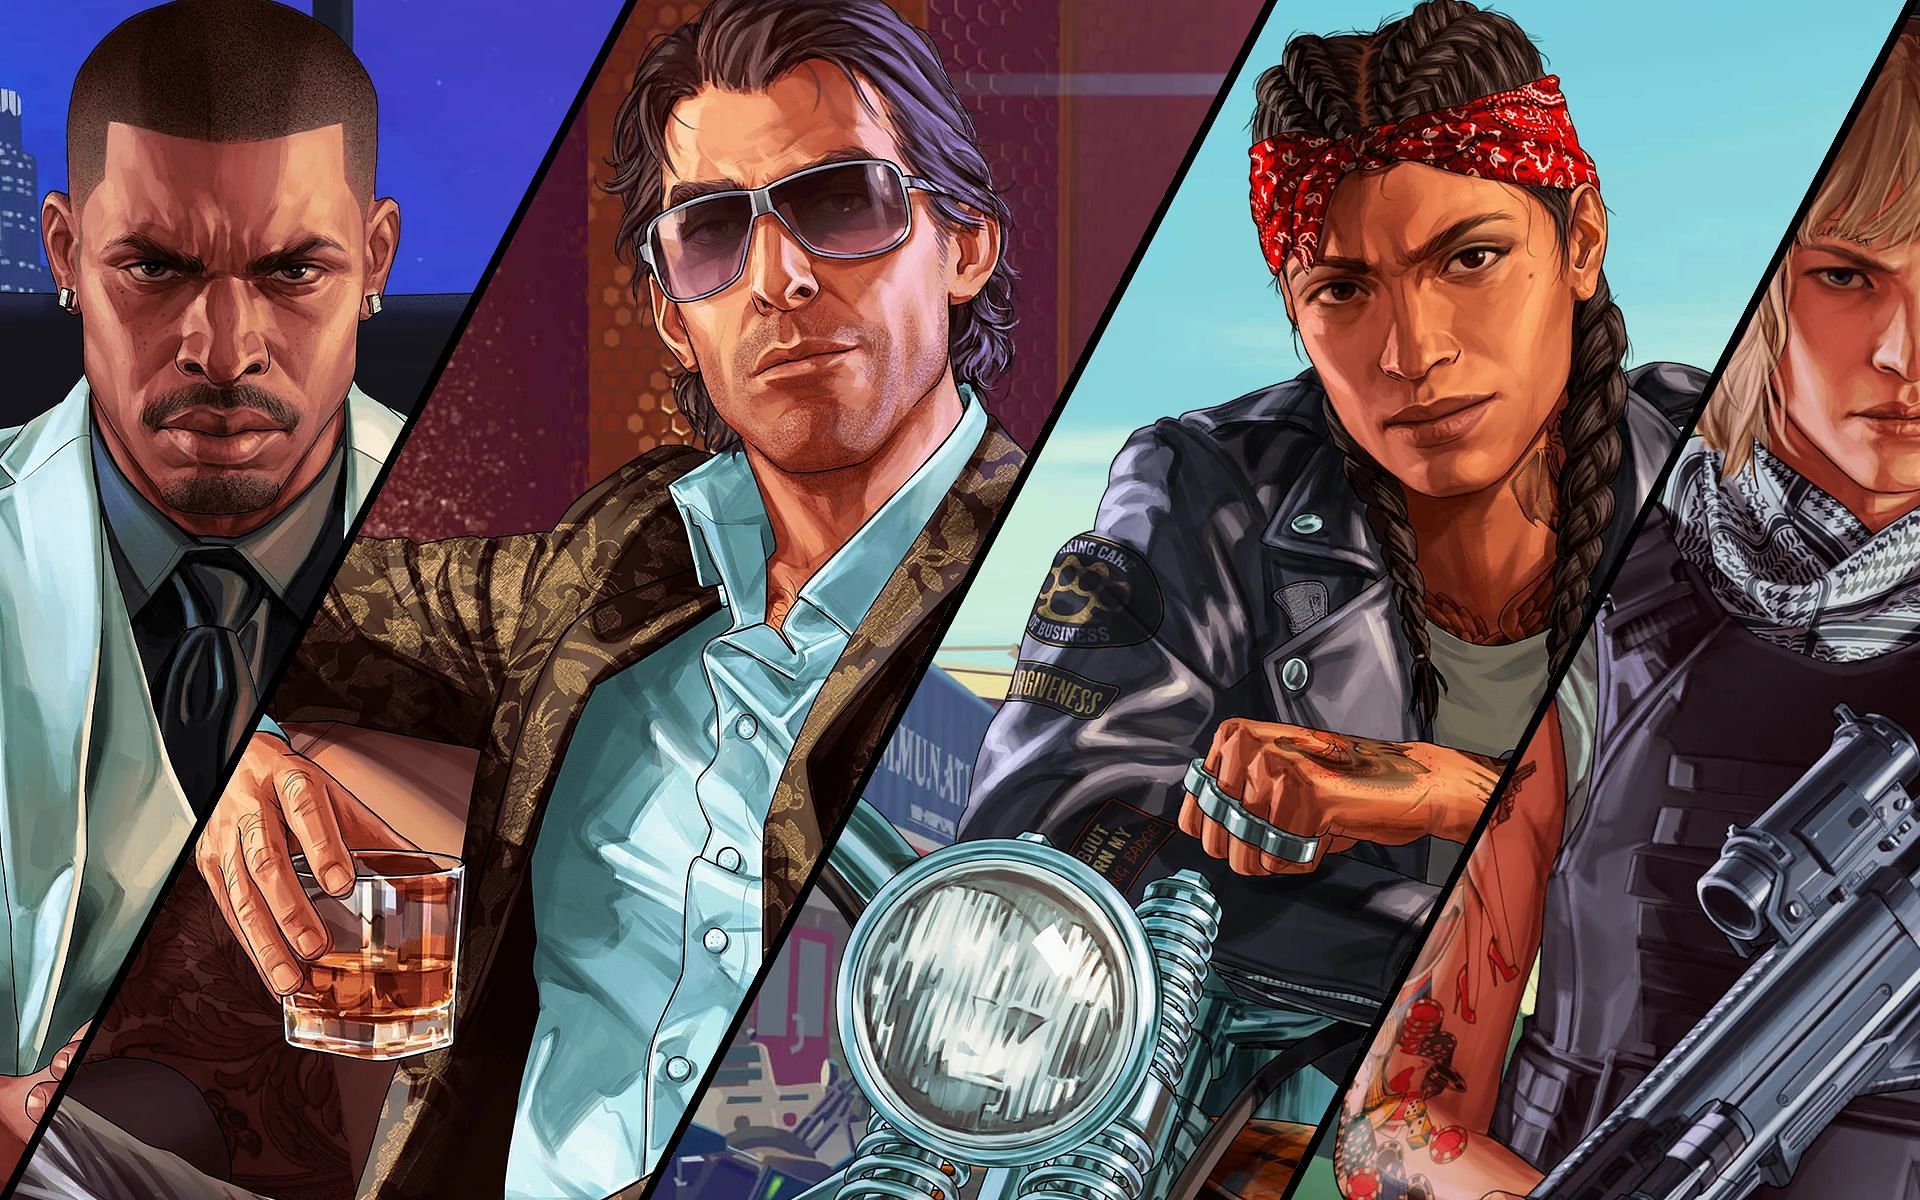 The four Career Builder options that new GTA Online players can pick from (Image via Rockstar Games)